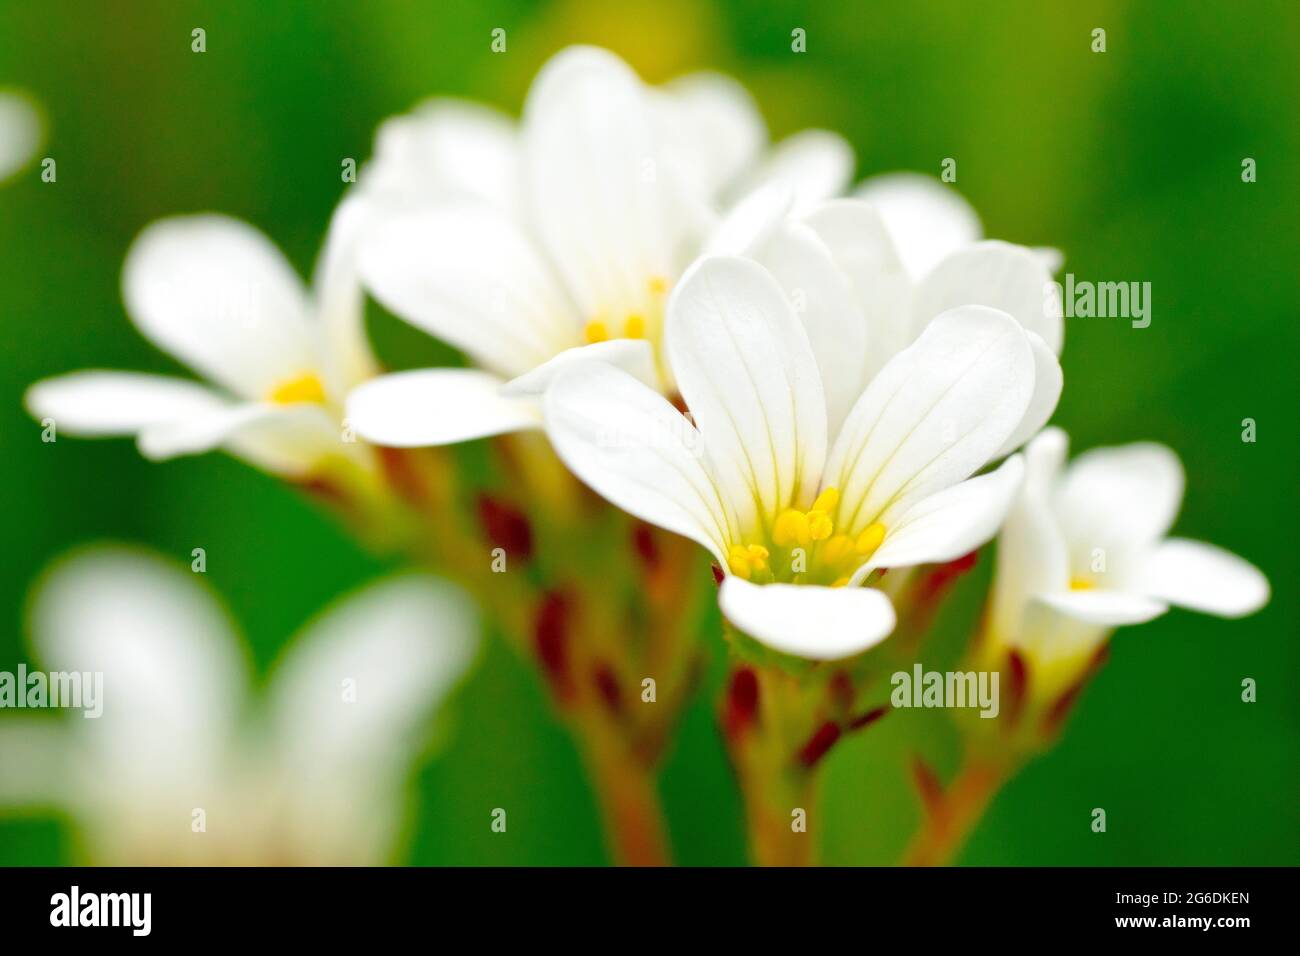 Meadow Saxifrage (saxifraga granulata), close up of a cluster of flowers focusing on a single flower. Stock Photo